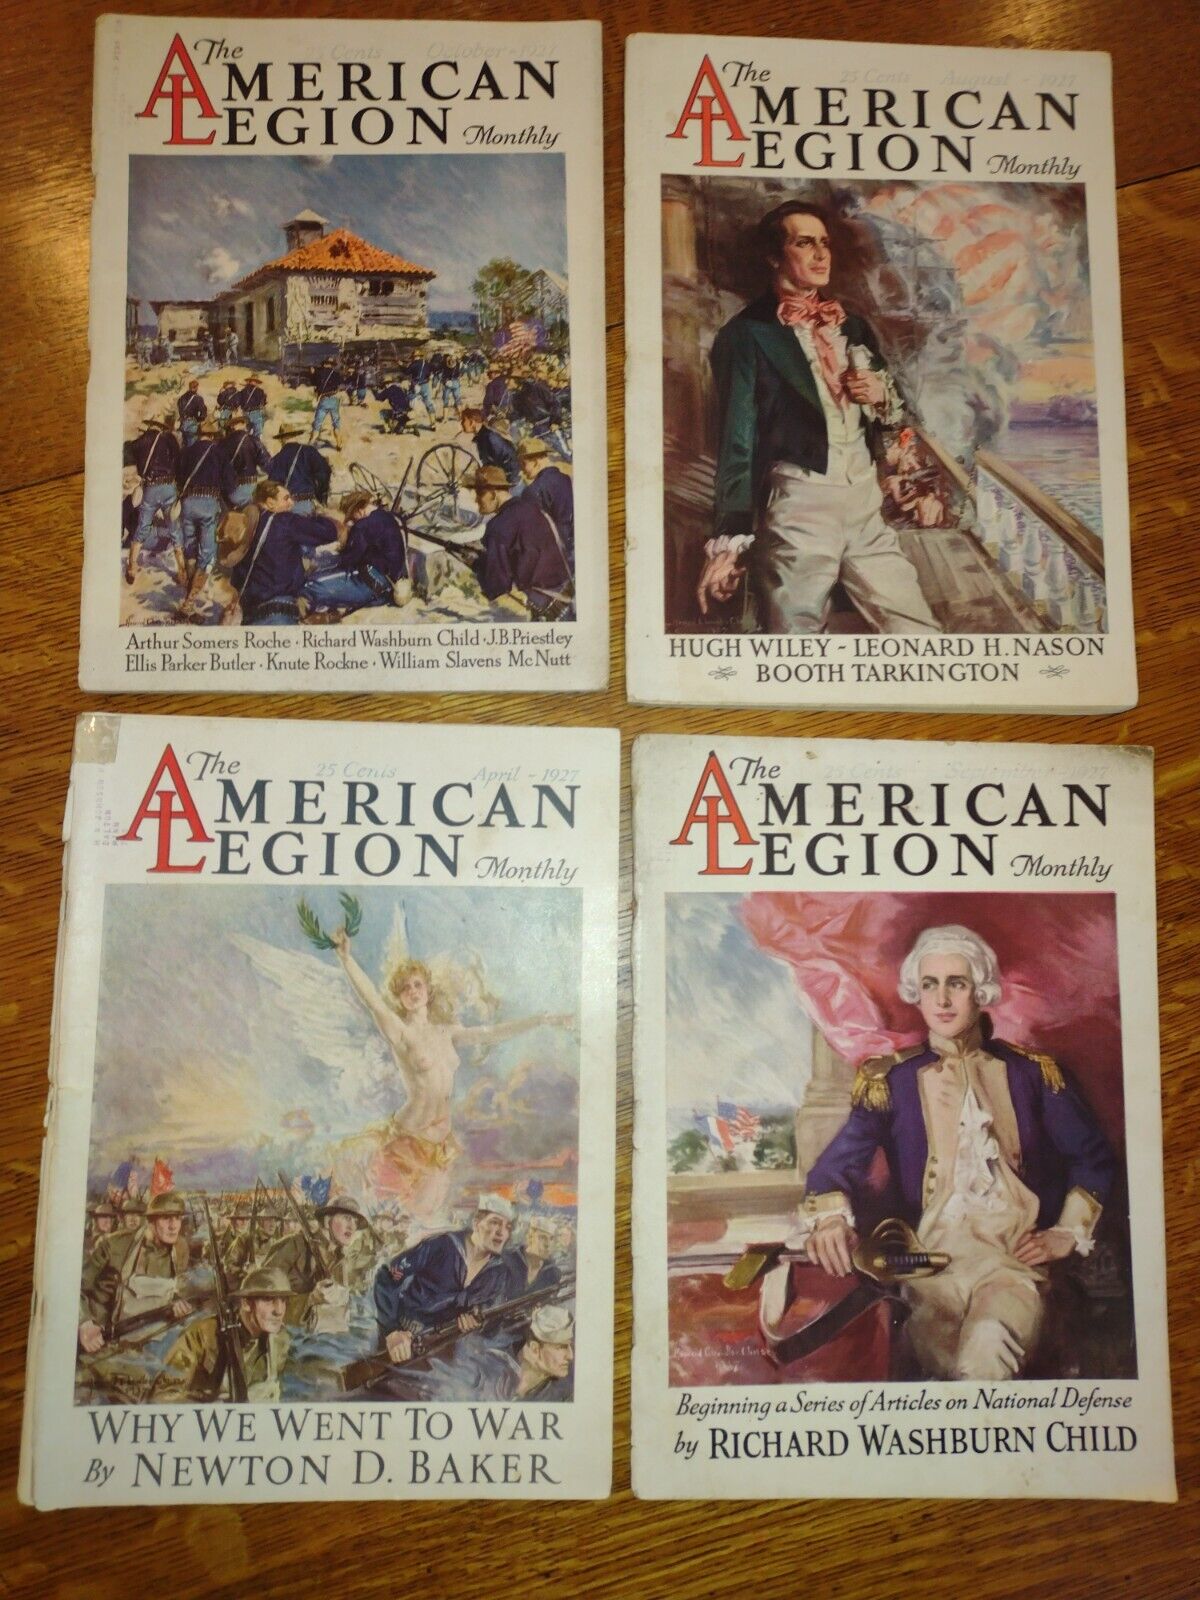 4 1927 The American Legion Monthly Magazines, April, Aug., Sept., and Oct. 1927